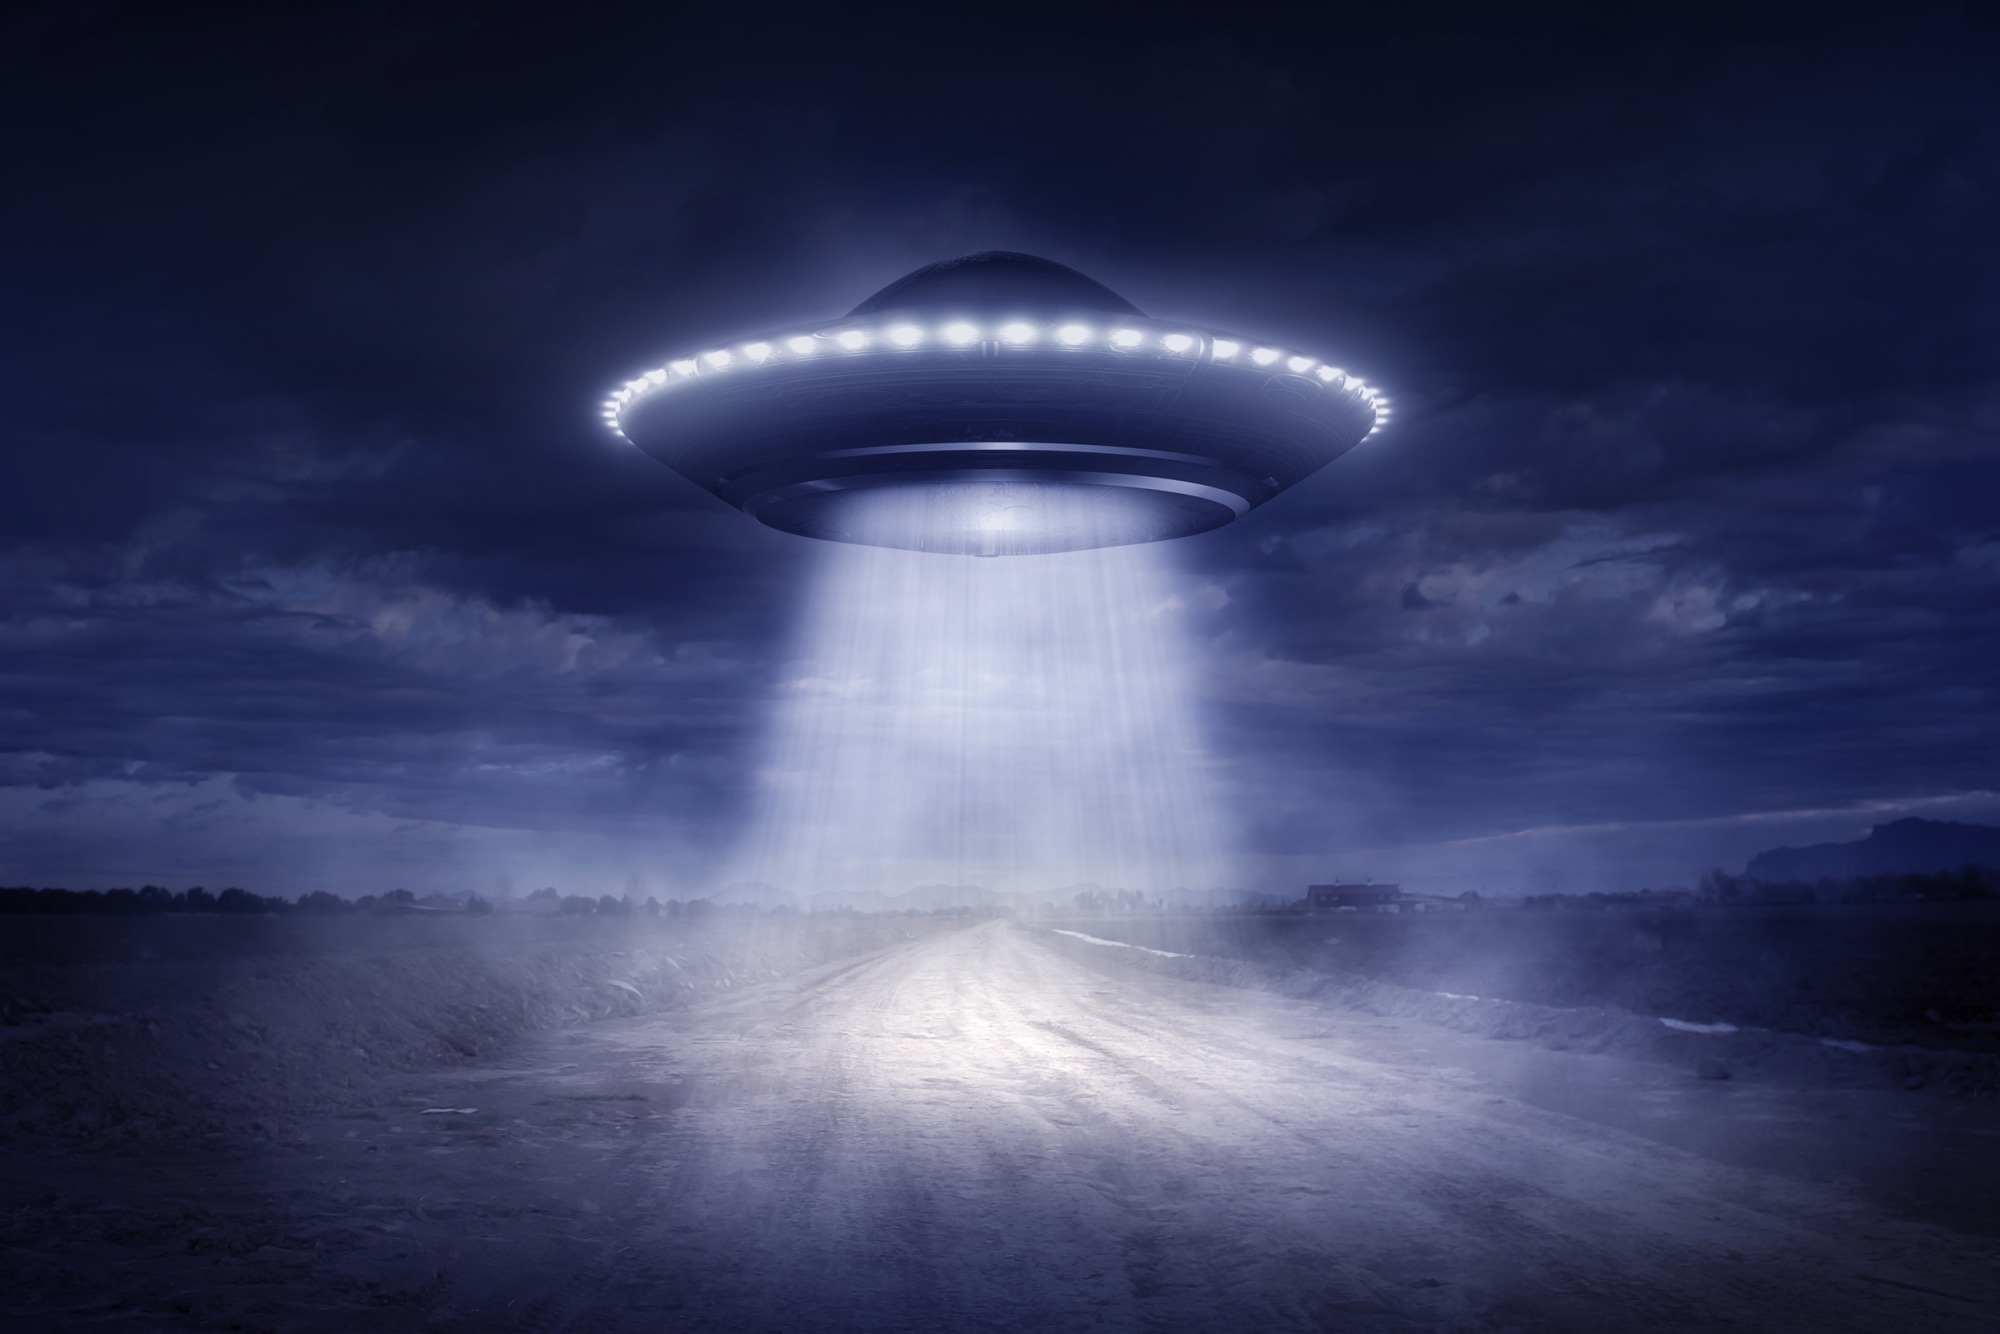 Image of a Flying Saucer at night, Photo by Chris Clor - Getty Images